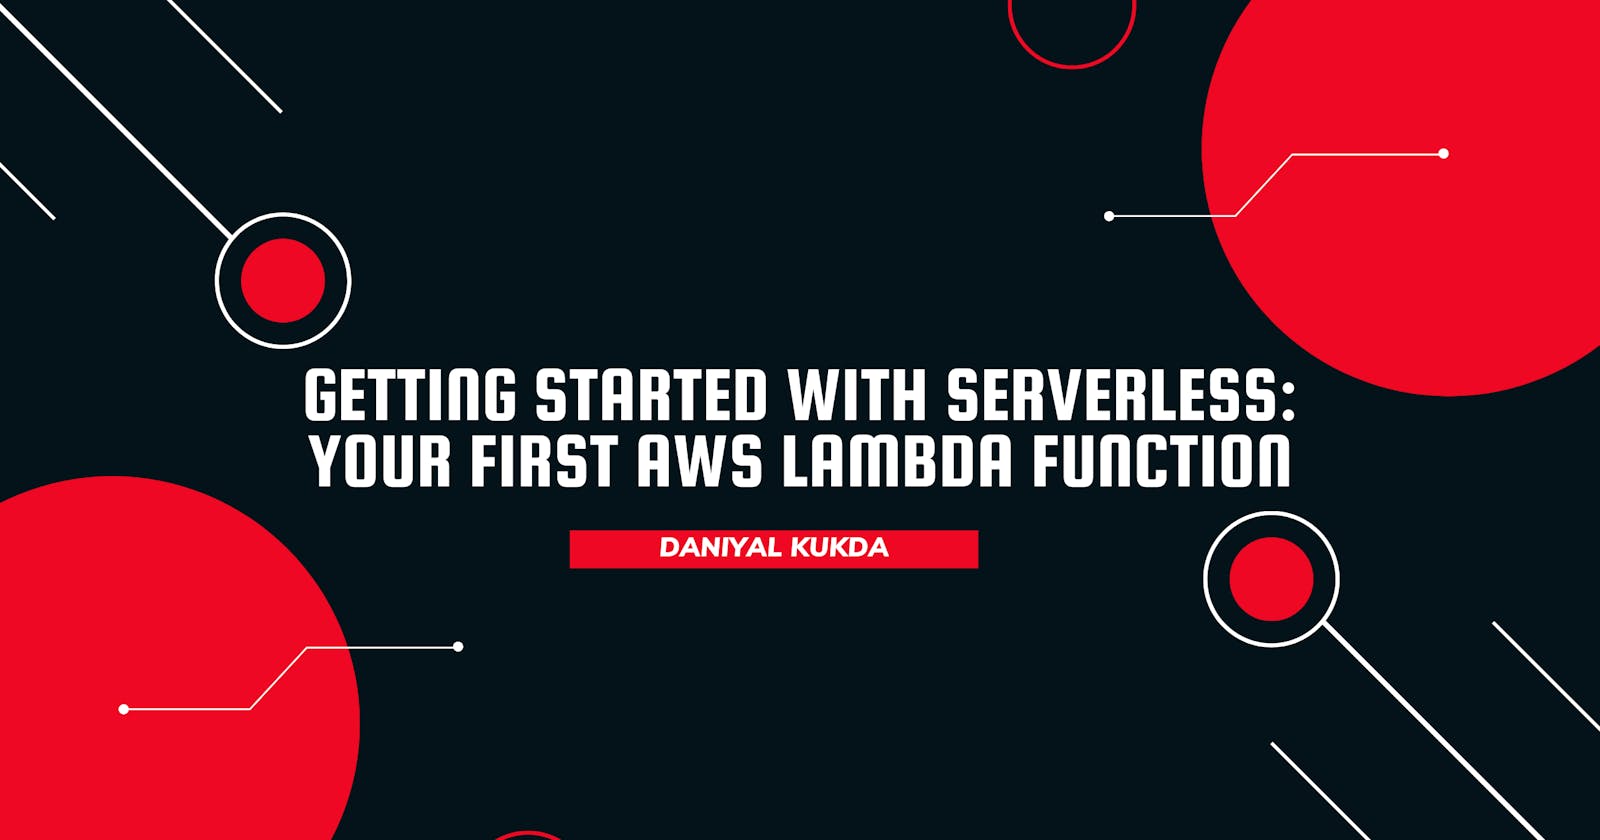 Getting Started with Serverless: Your First AWS Lambda Function